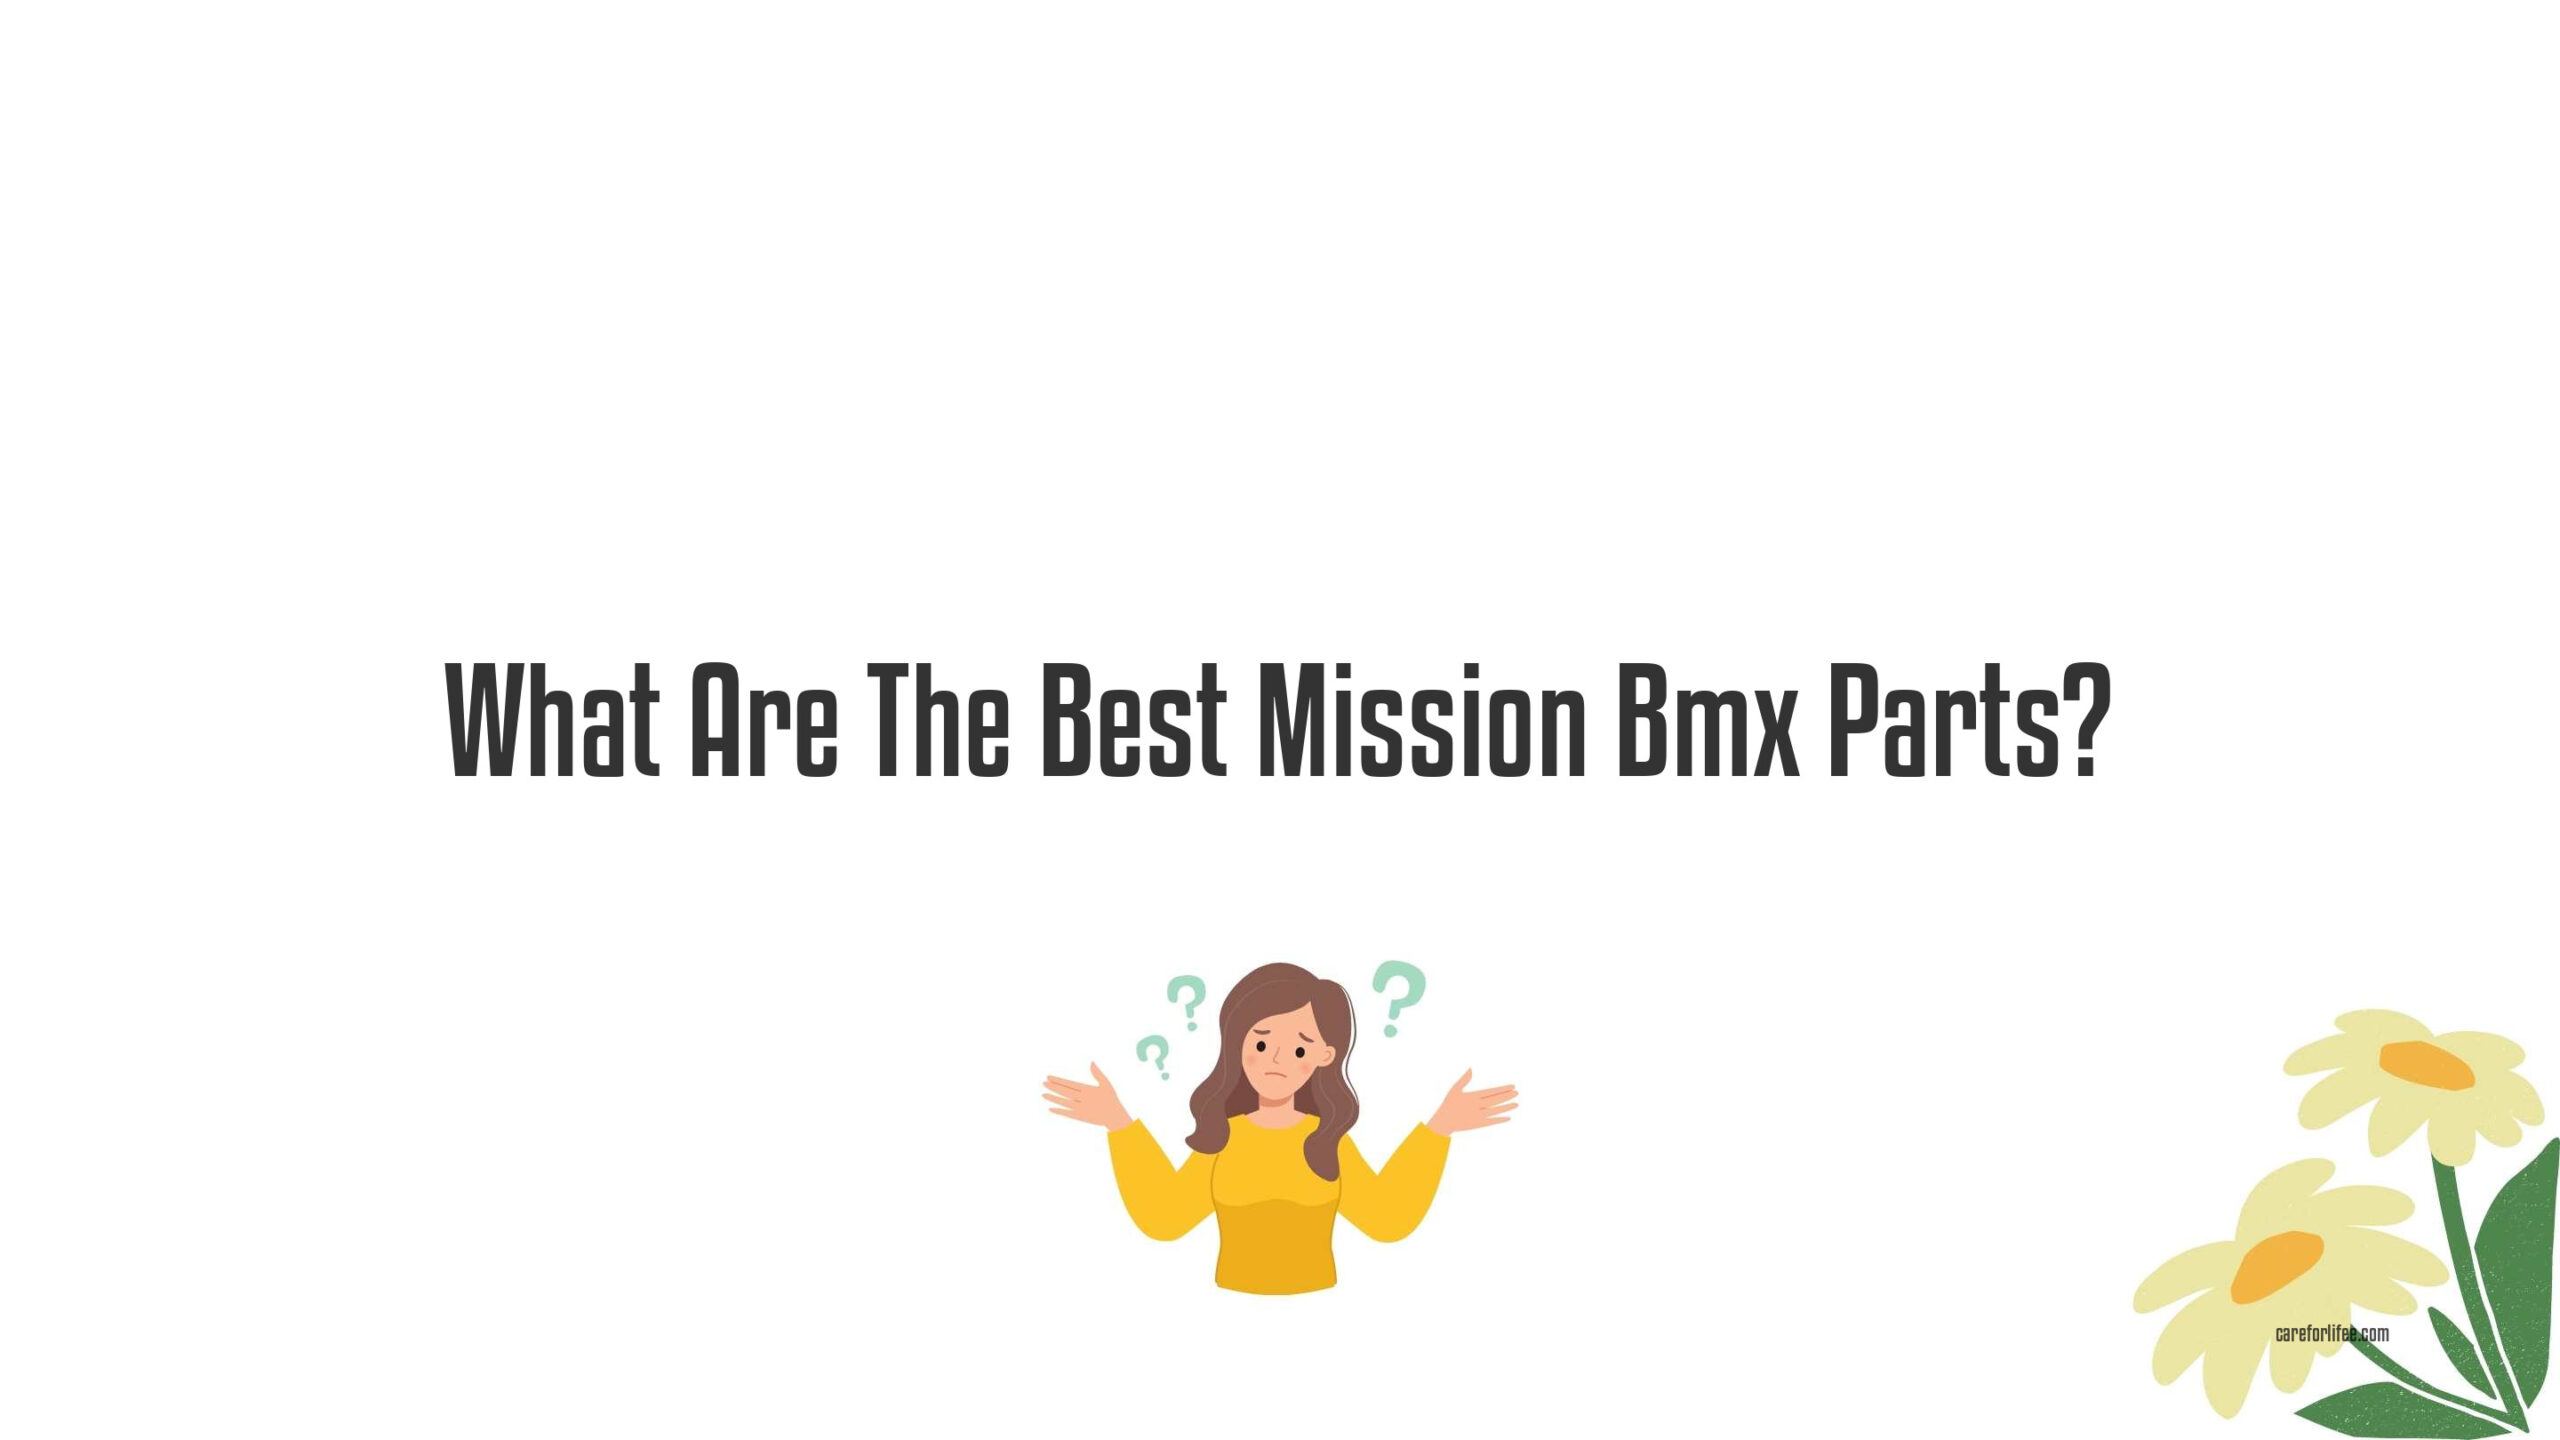 What Are The Best Mission Bmx Parts?